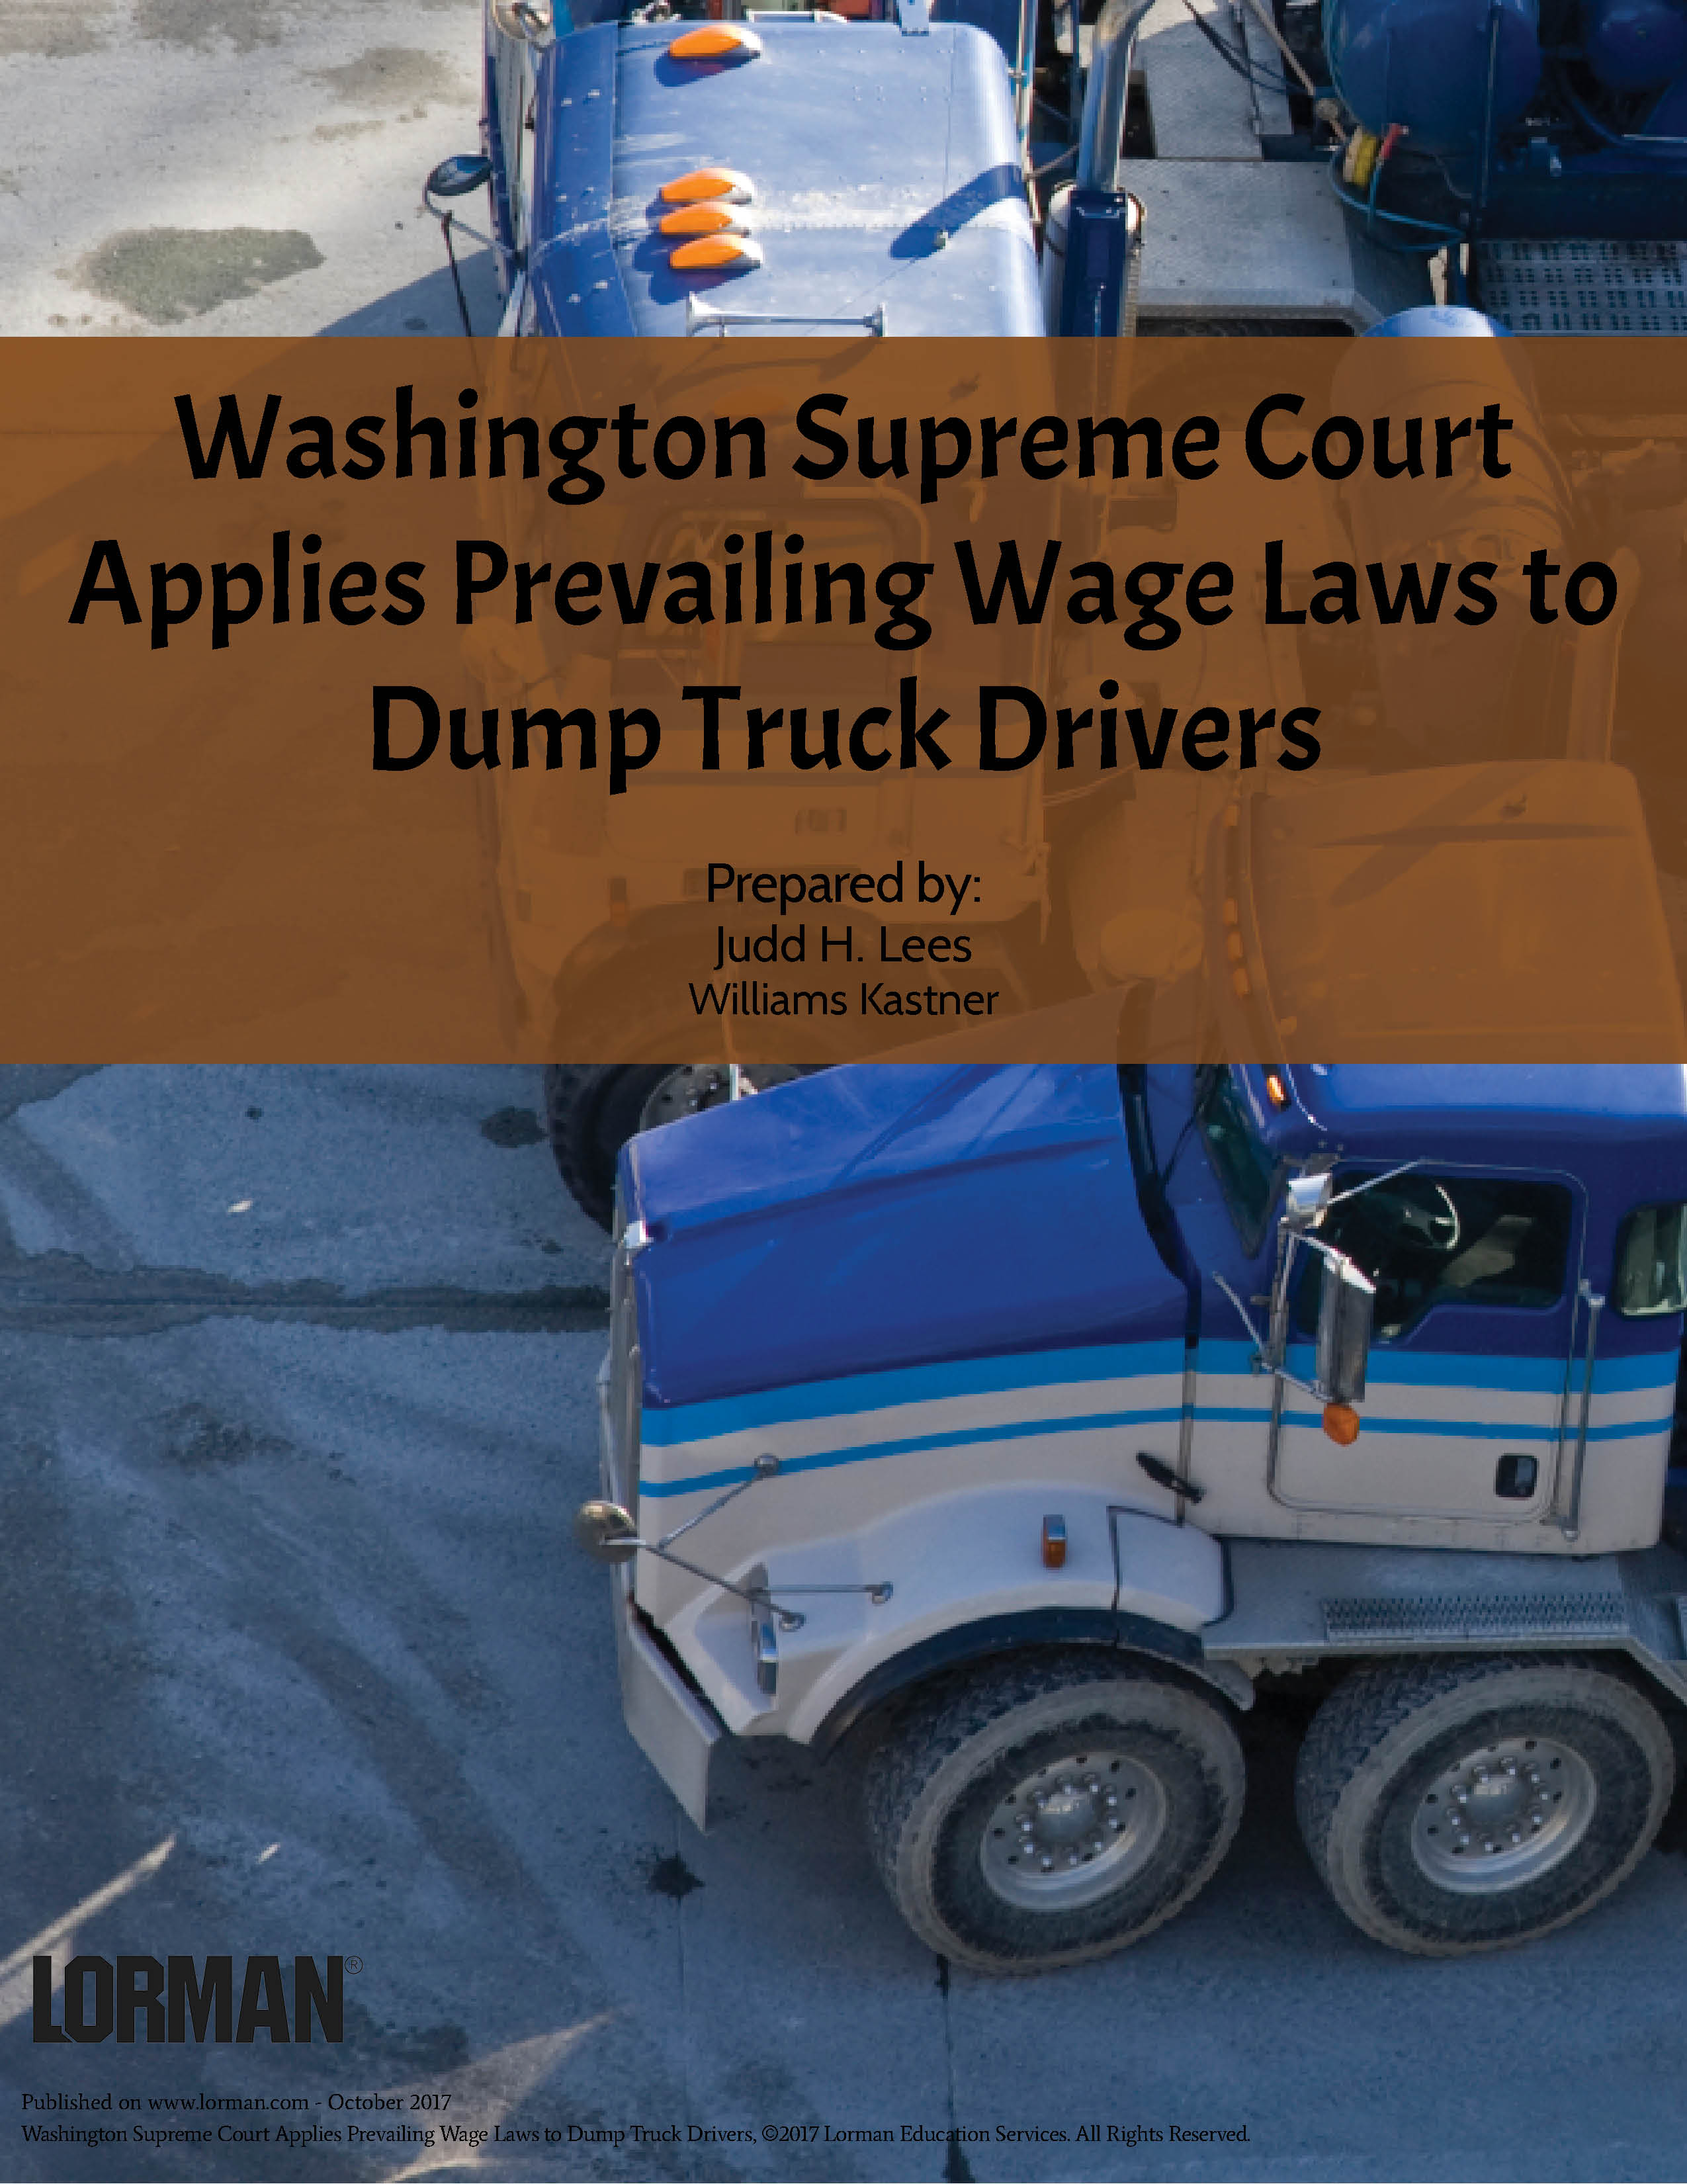 Washington Supreme Court Applies Prevailing Wage Laws to Dump Truck Drivers